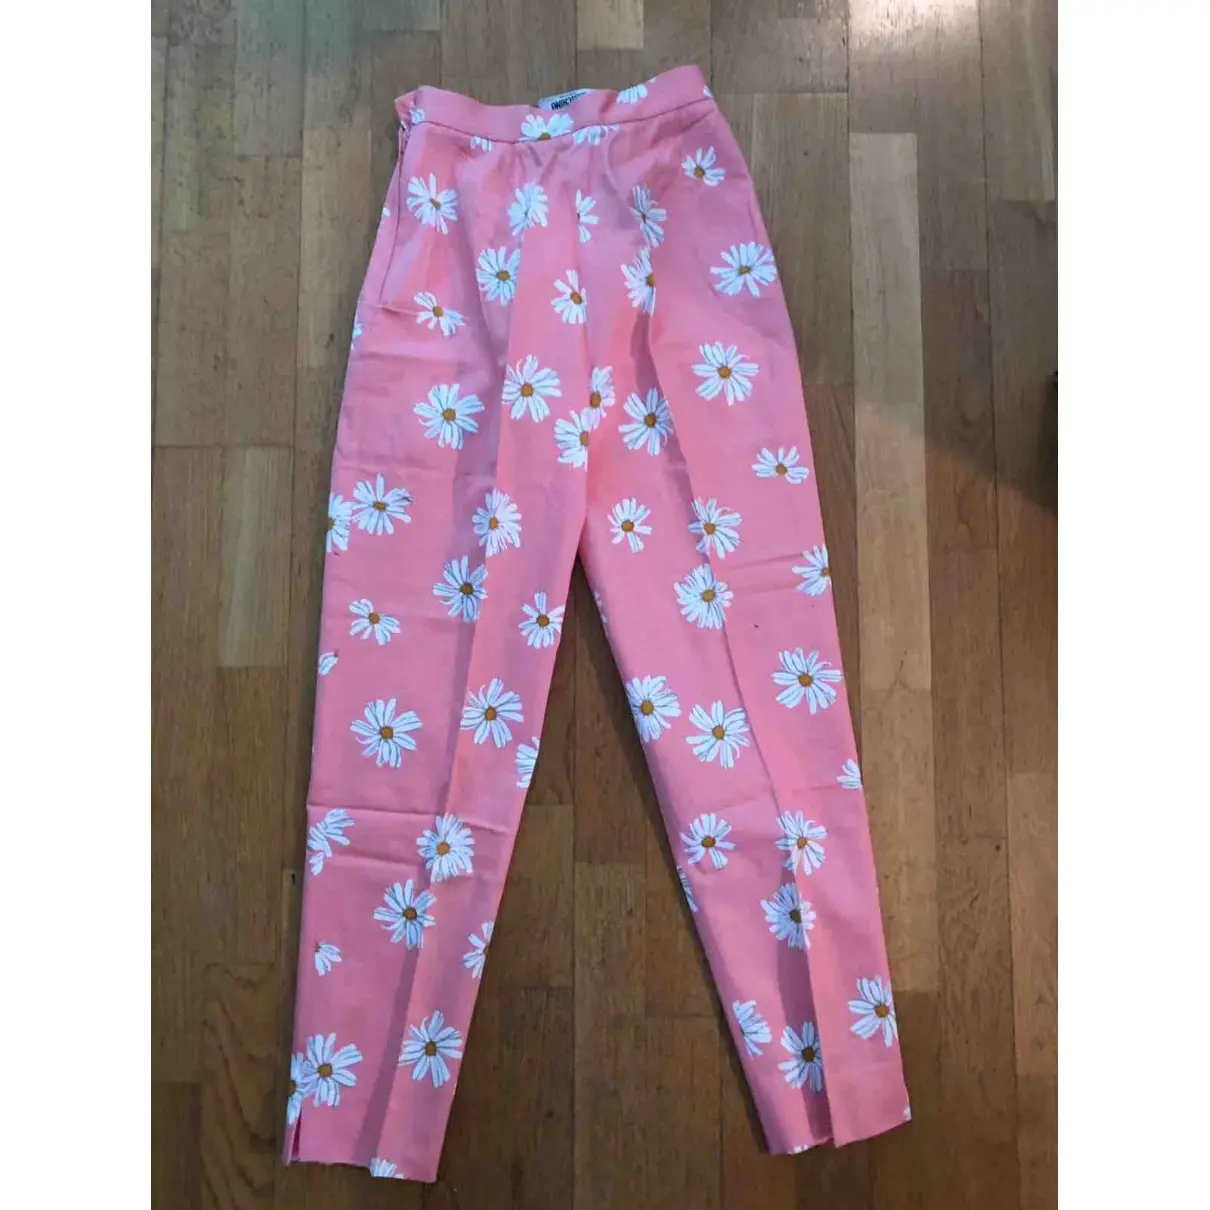 Moschino Cheap And Chic Carot pants for sale